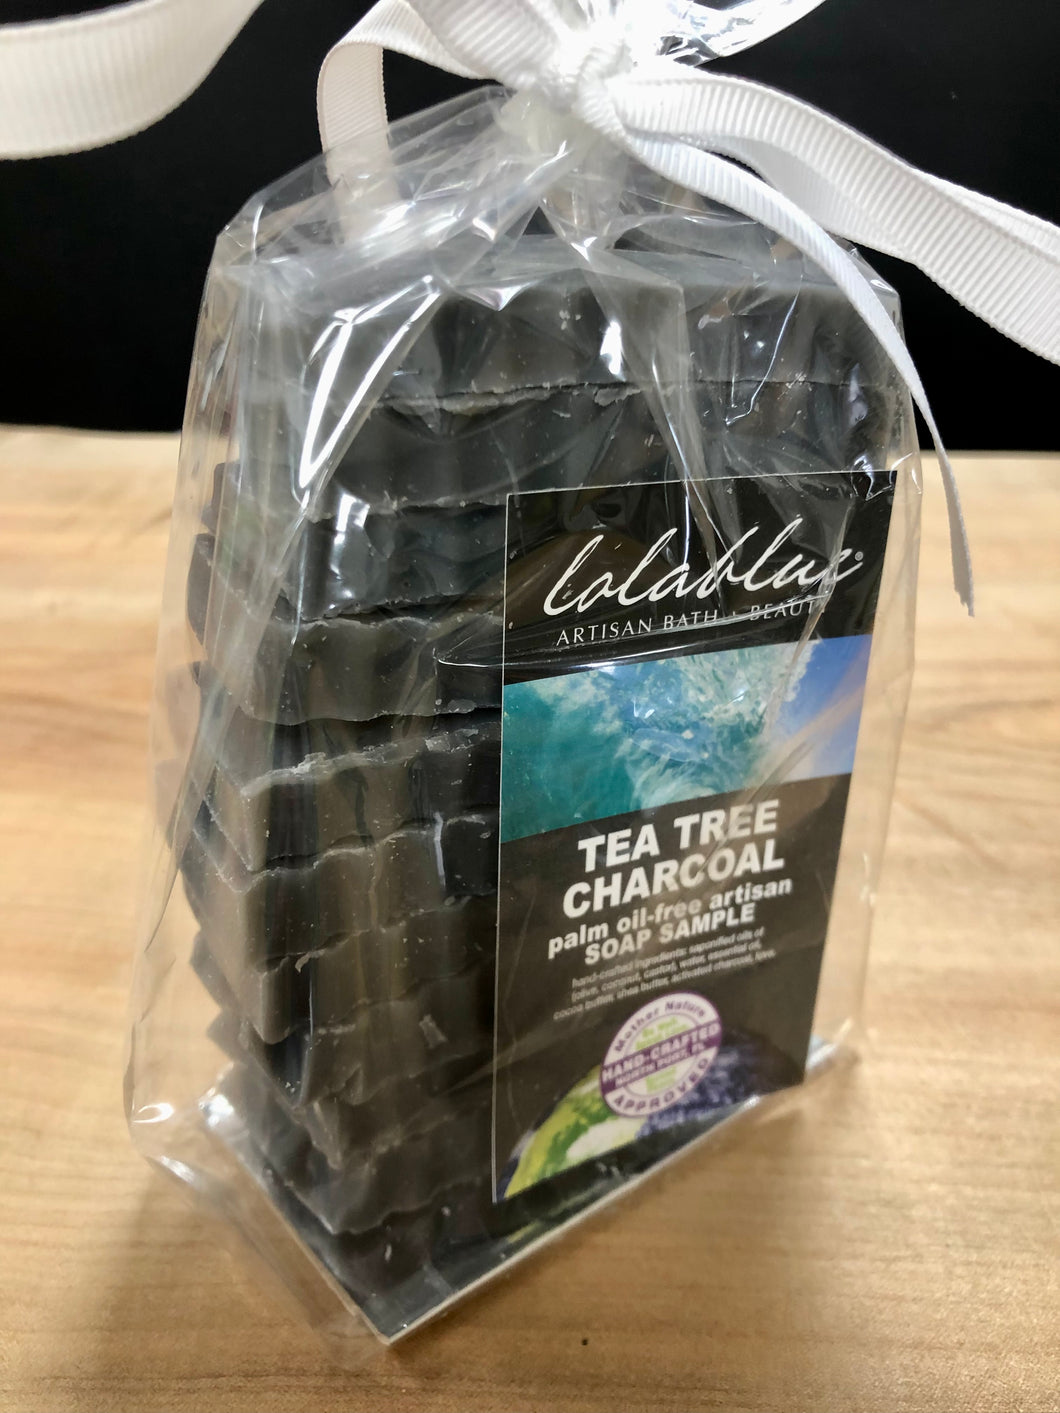 Tea Tree Charcoal- One HALF POUND Bag of soap ends/travel sizes